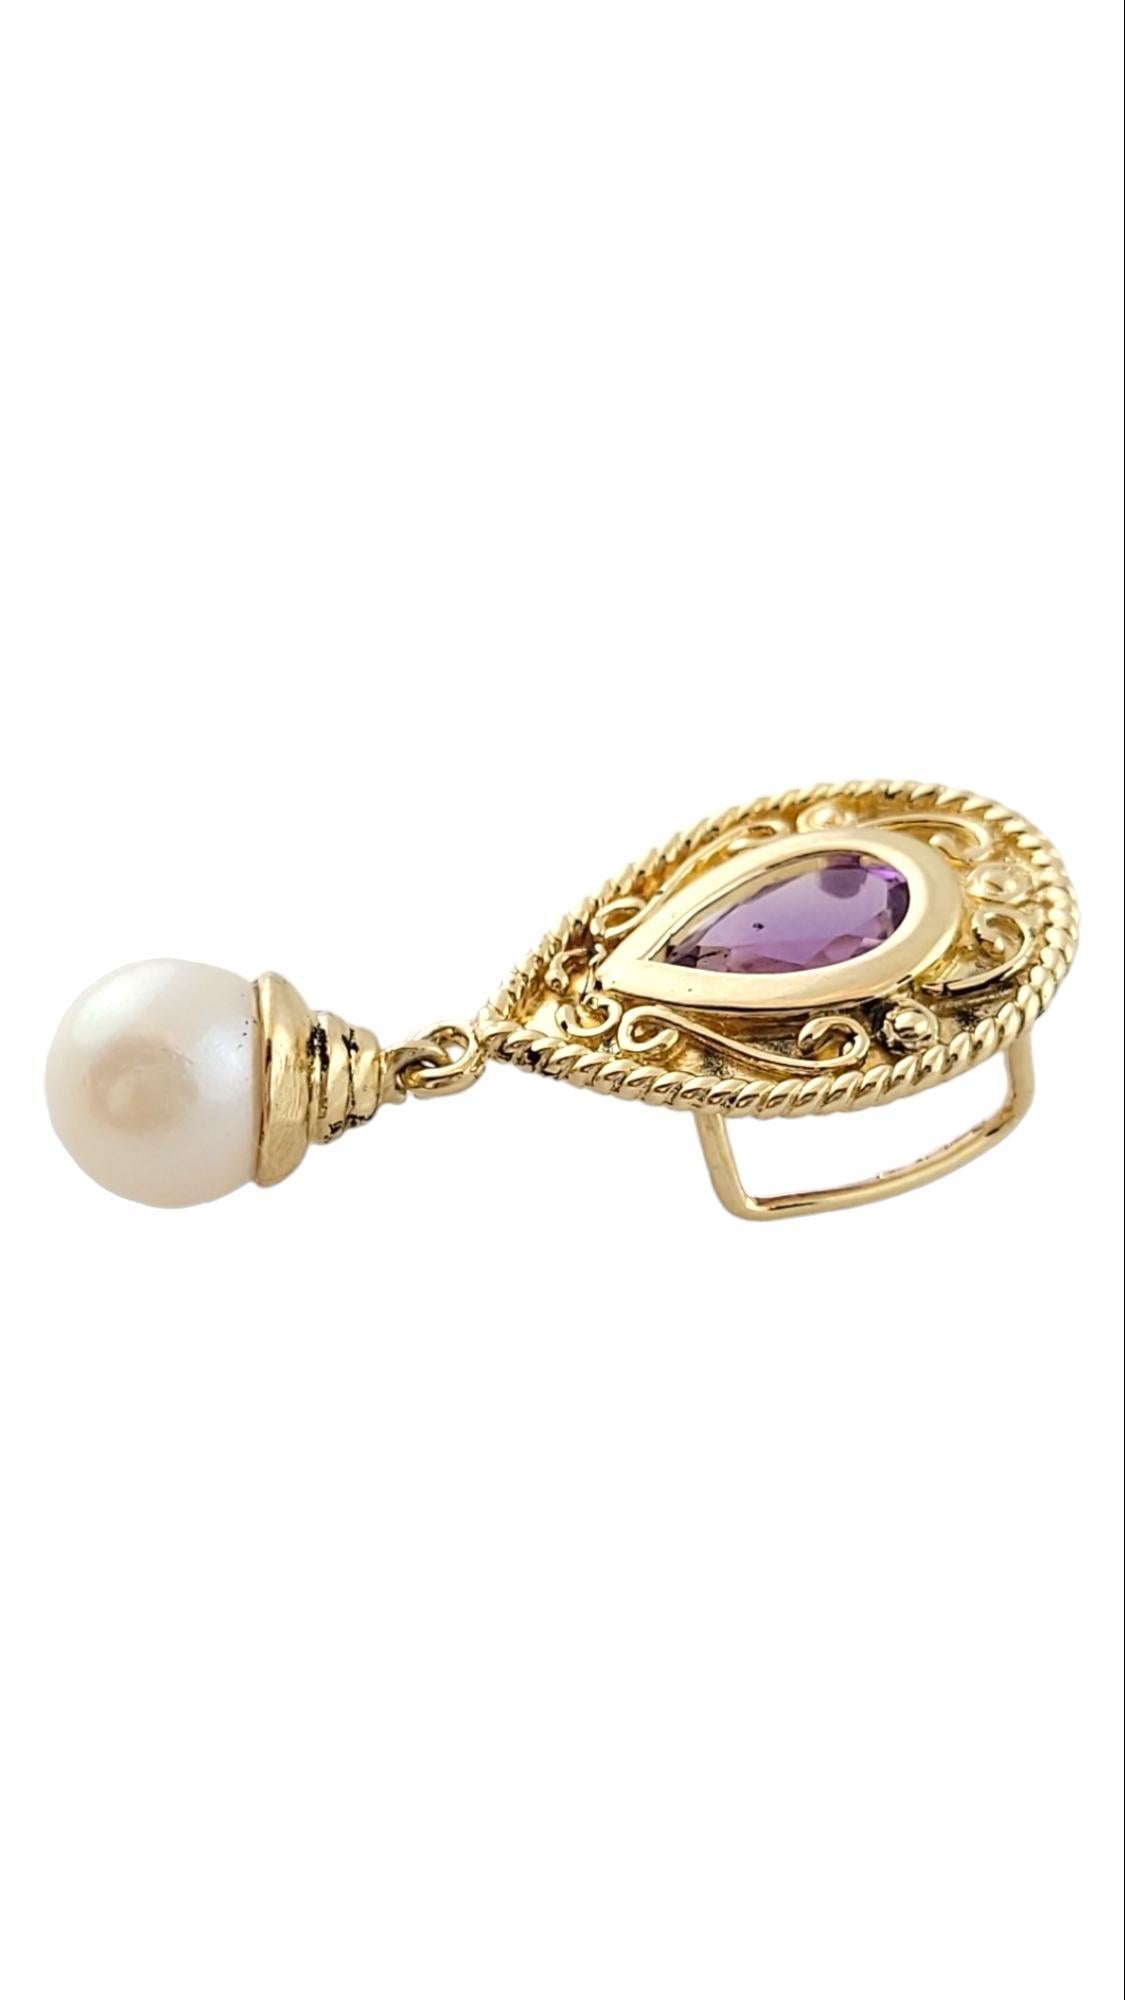 Vintage 14K Yellow Gold Amethyst and Pearl Pendant

This gorgeous pendant features a beautiful purple amethyst stone and a hanging, cultured freshwater pearl!

Pearl: 6.9mm

Size: 29.5mm X 13.4mm X 6.9mm

Weight: 2.5 g/ 1.6 dwt

Hallmark: